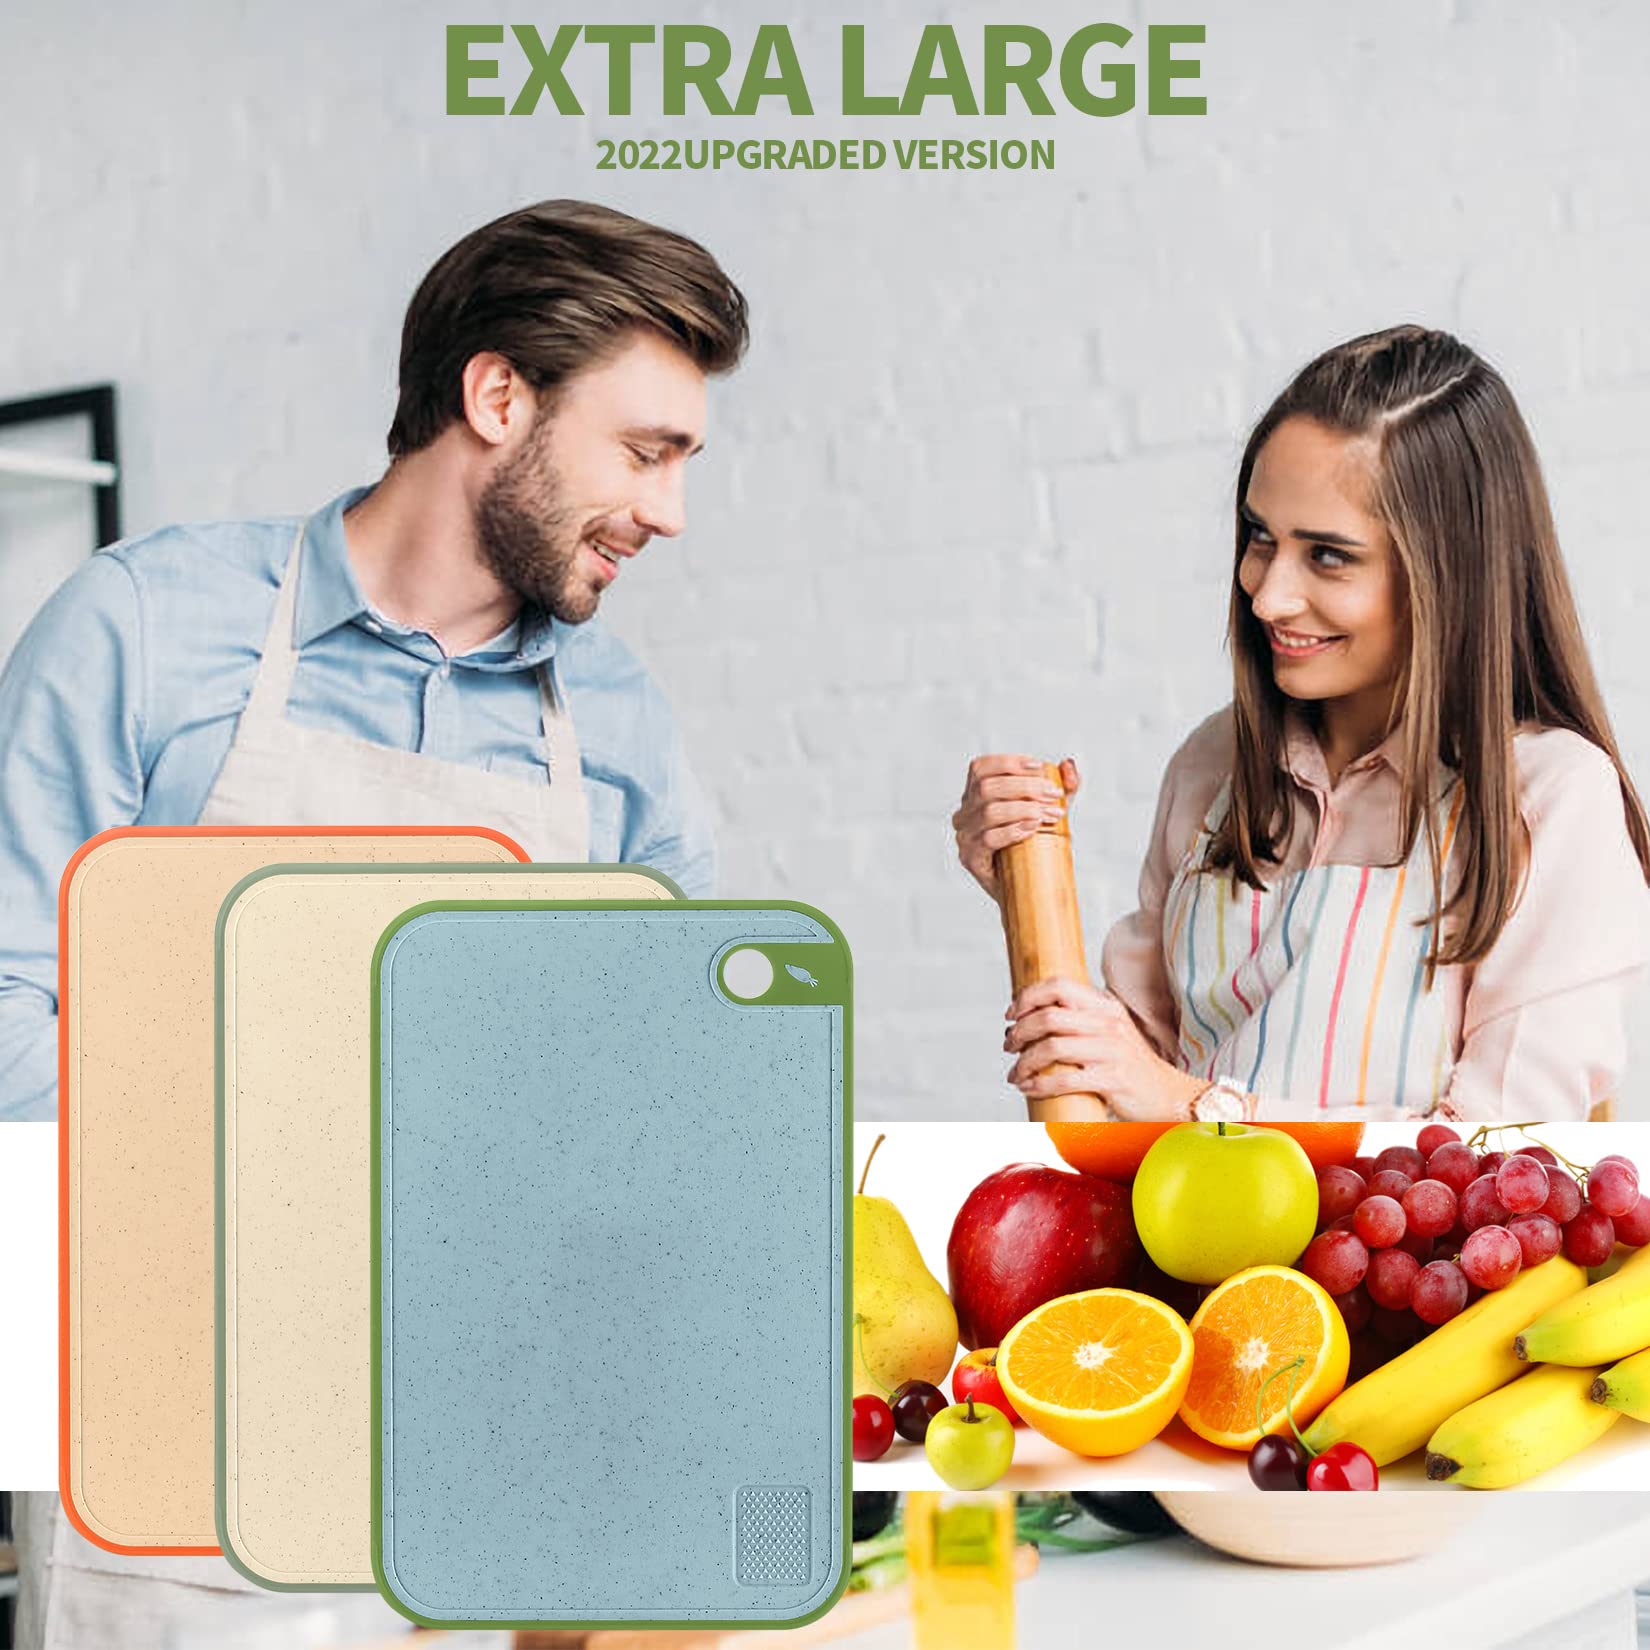 3 Pcs Cutting Board for Kitchen, Chopping Boards Set, Kitchen Cutting Boards Non Slip with Hanging Holes for Cutting Fruits, Vegetables, Easy to Clean, Reusable, 35 * 23 * 0.8cm/13.7x9x0.31 inch